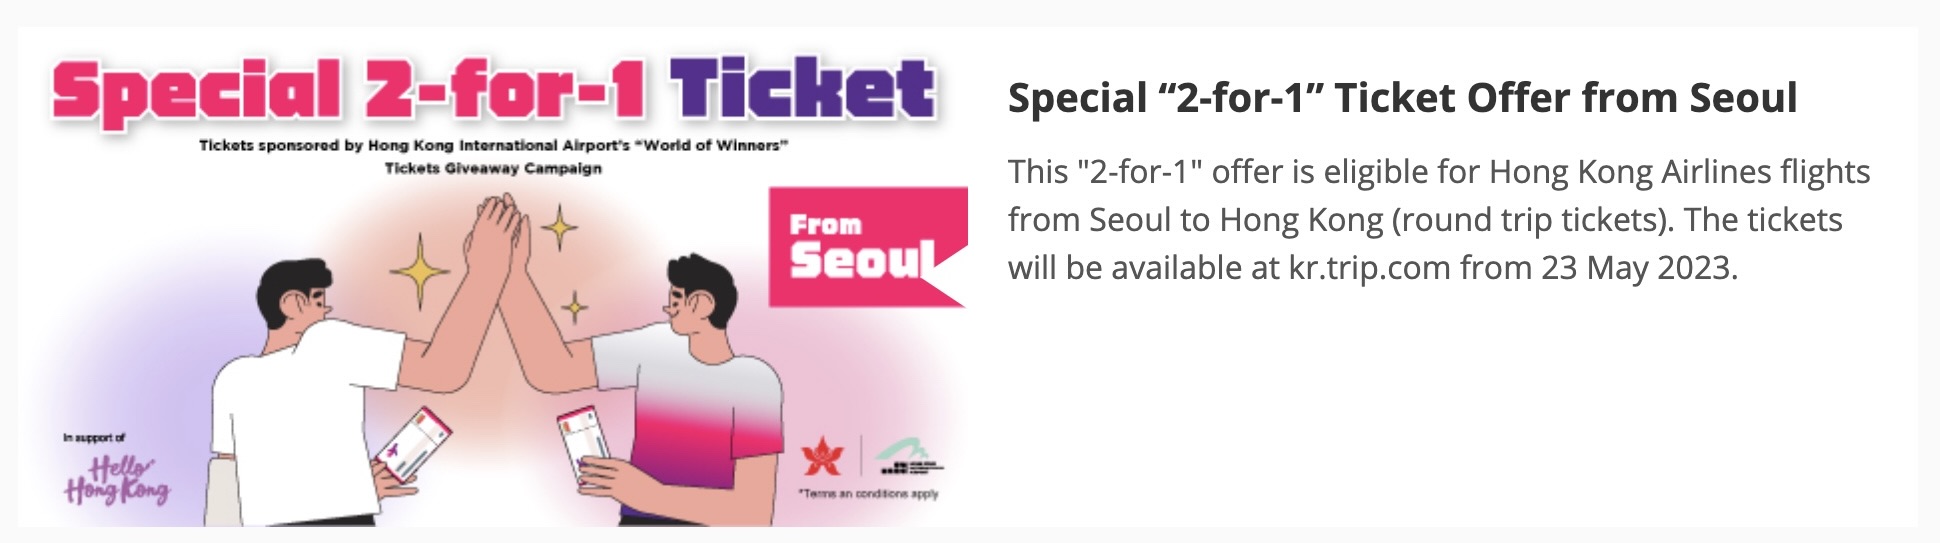 The Hong Kong Airlines Special 2-for-1 Offer begins on May 23.